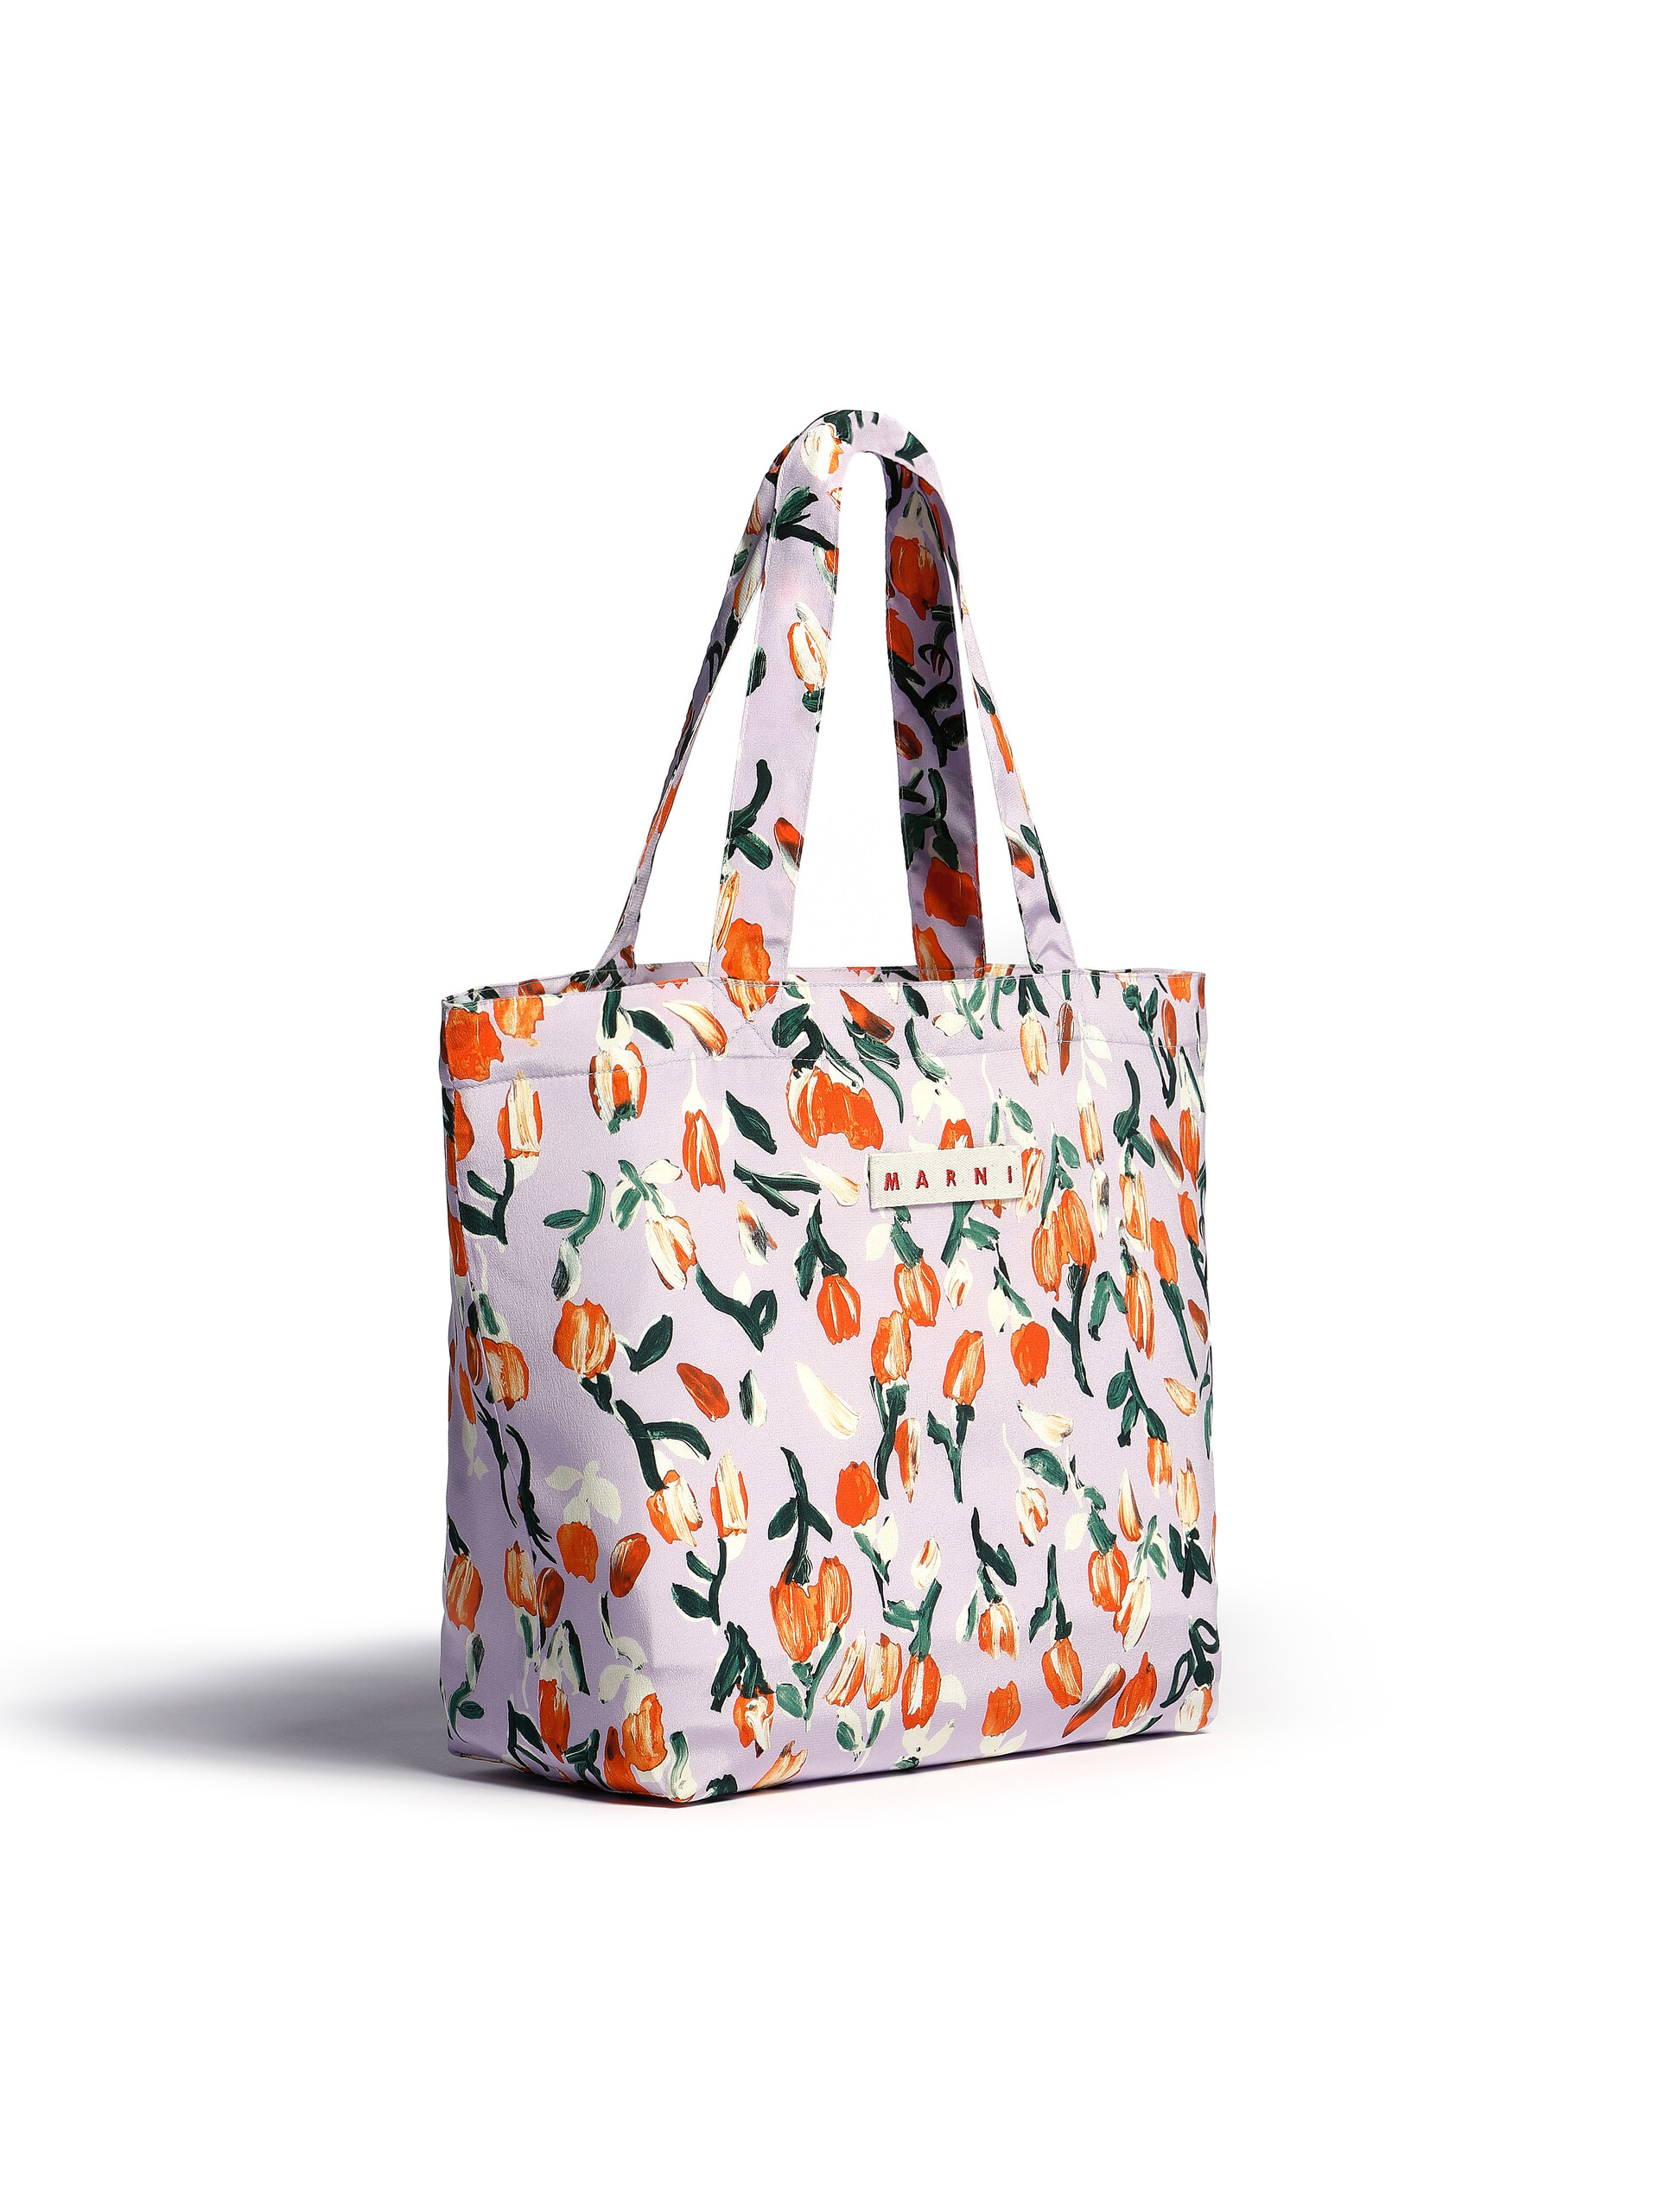 Lilac silk tote bag with archival floral print - Bags - Image 2